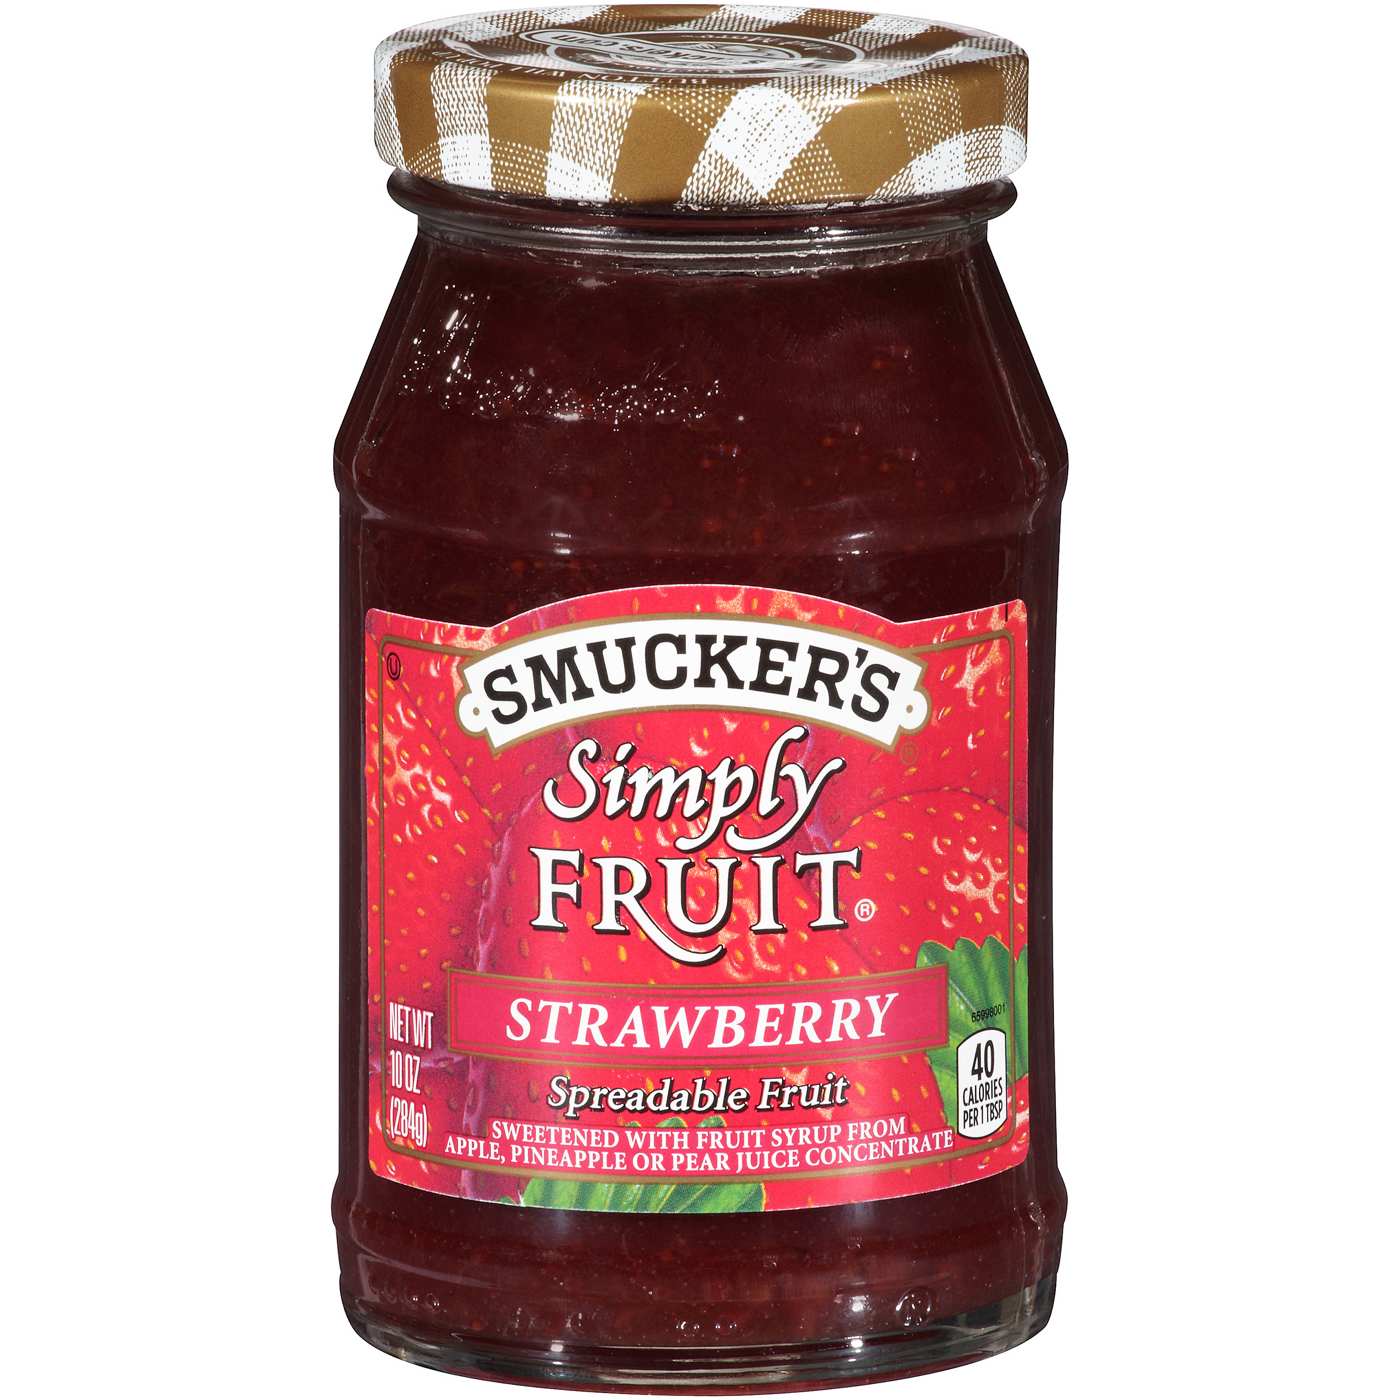 Smucker's Simply Fruit Strawberry Spreadable Fruit; image 1 of 2